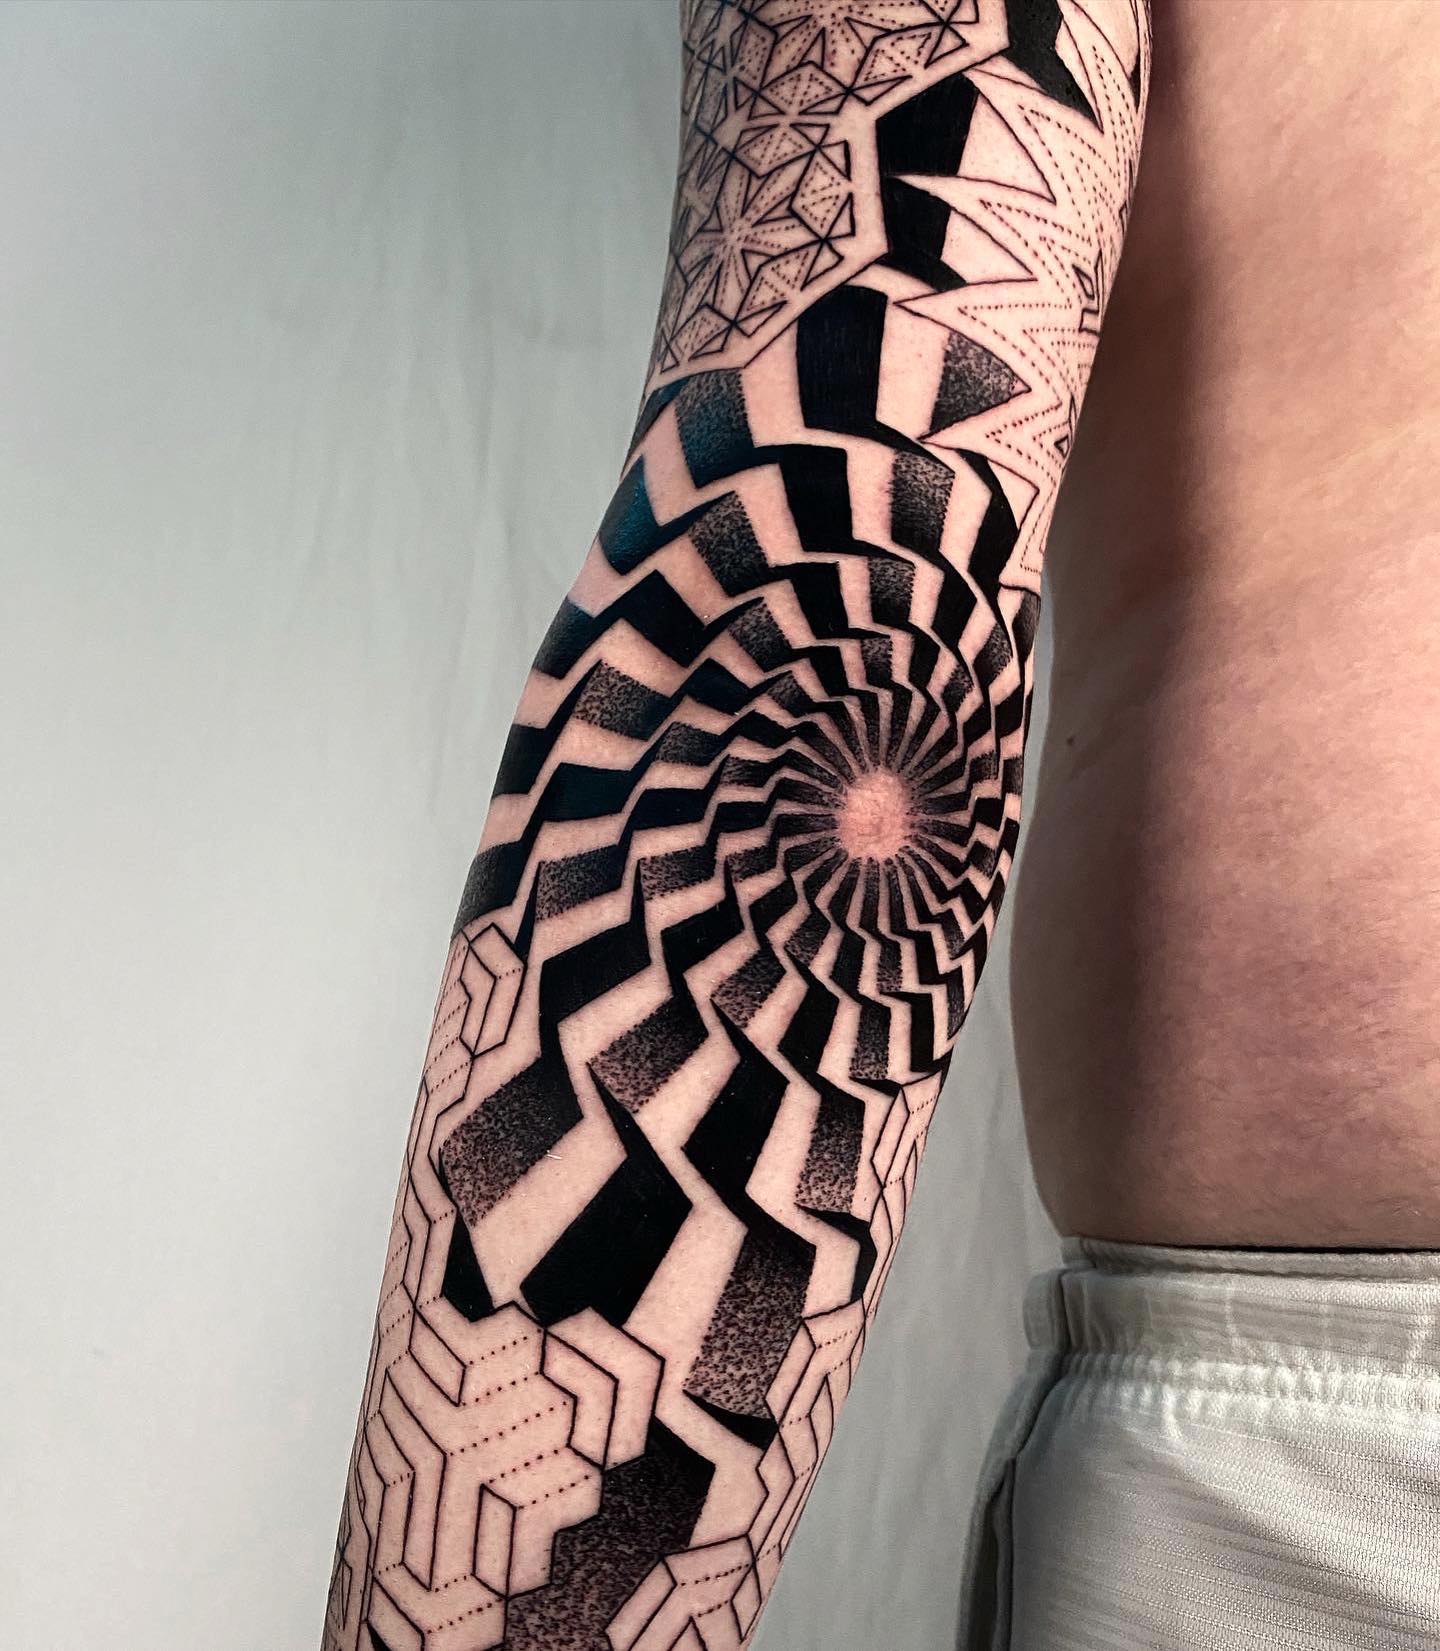 Cool elbow tattoo that has a bit of that Sci-fi element to it. If you’re into black ink and you like illusions, this tattoo will suit you. It is a masterpiece, often worn by those who like dramatic and cool tattoos.